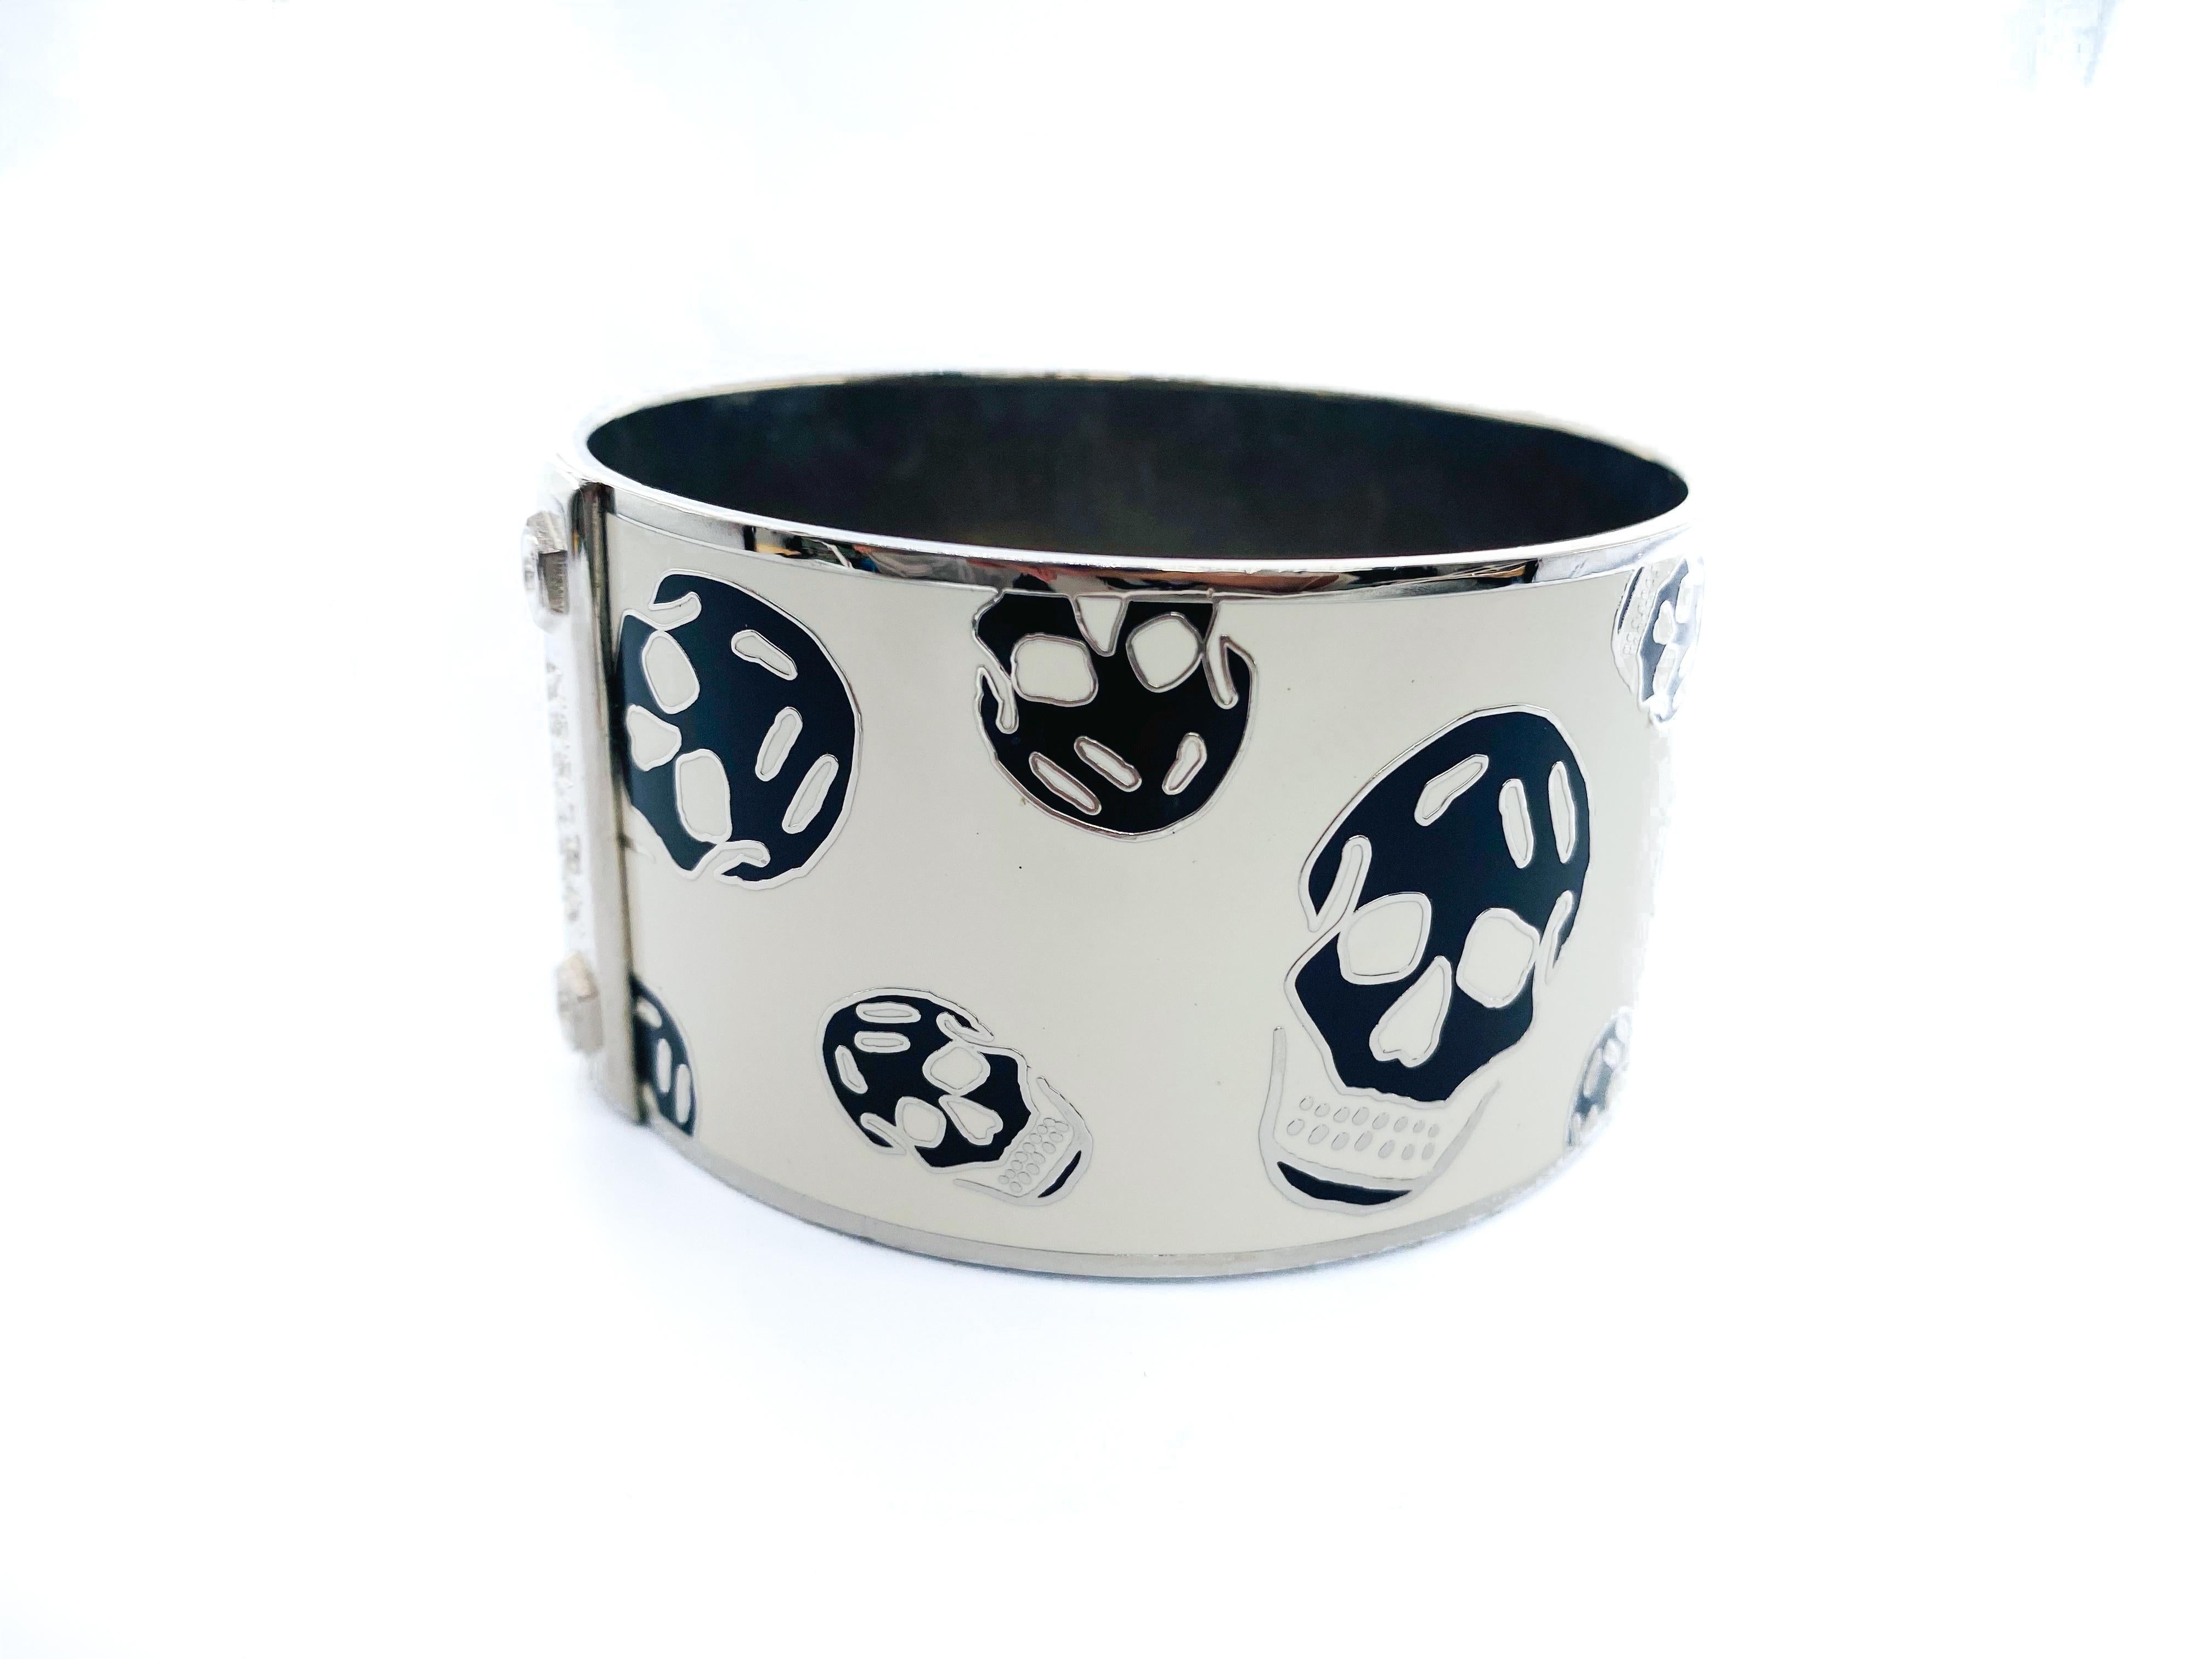 Alexander McQueen Bracelet Skull Cuff

Super cool cuff from Alexander McQueen. Made from white enamel and a heavy silver-tone brass with black skulls. 

Style notes:
Wear this bold piece to bring a cool edge to your weekend wardrobe and your classic